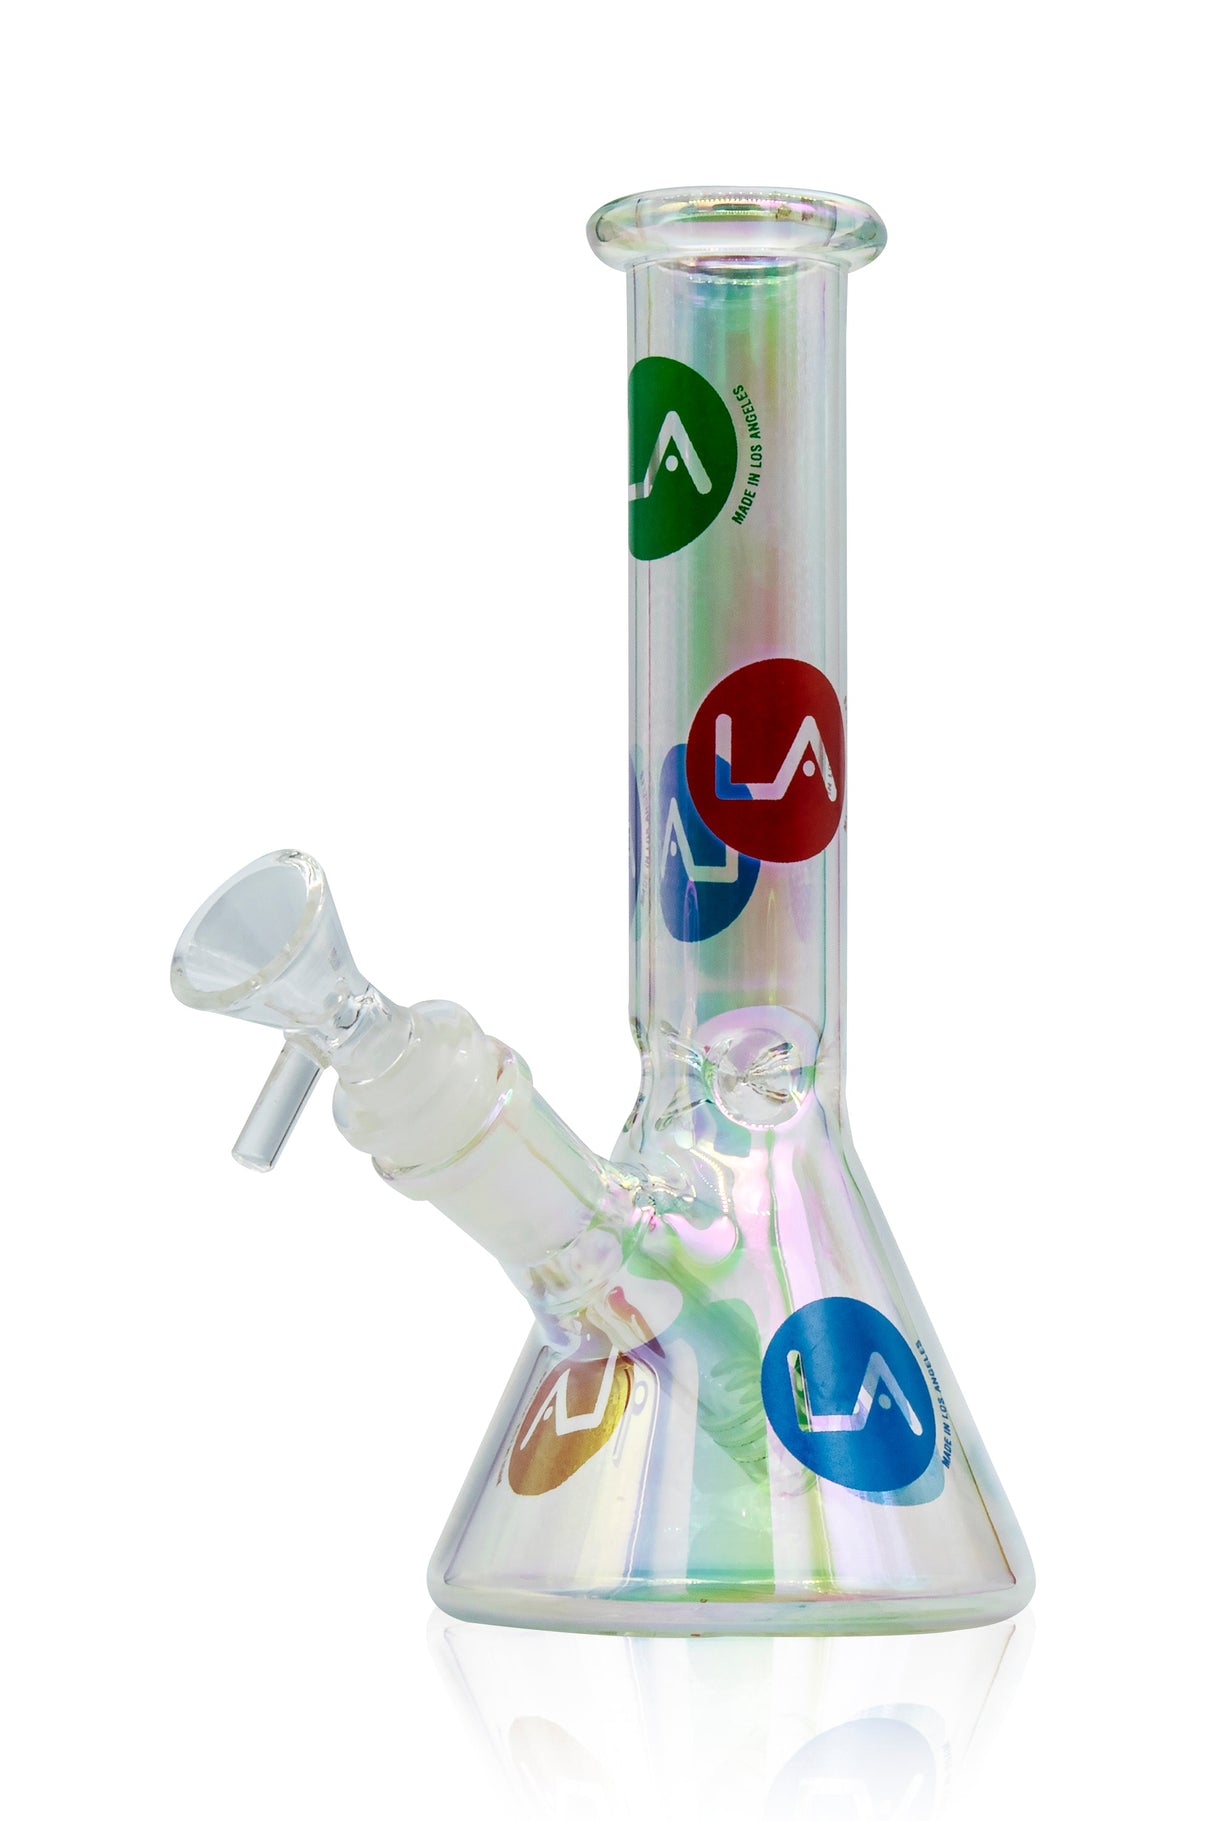 LA Pipes Champagne Glass Disco Beaker Bong with colorful logo, front view on white background